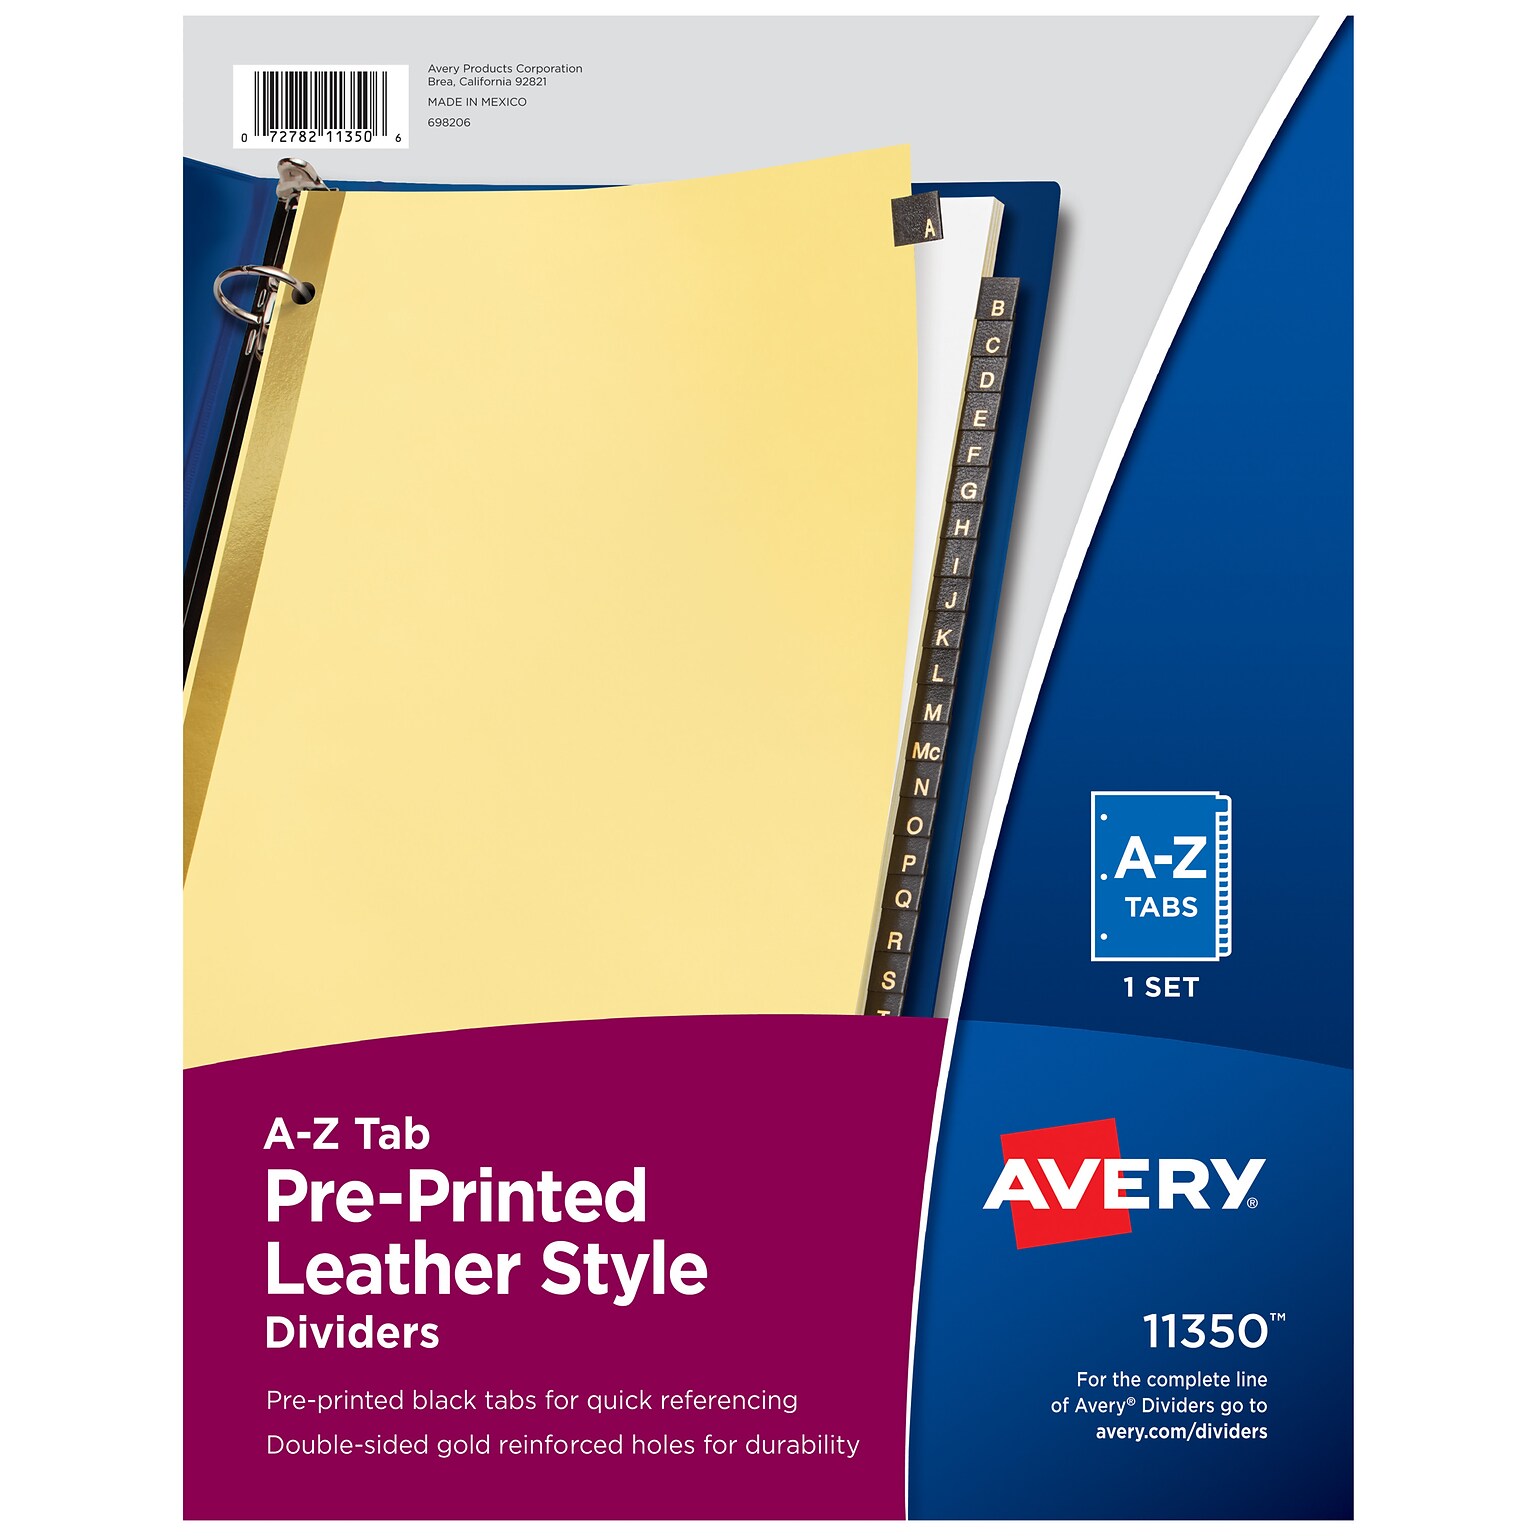 Avery A-Z Leather Dividers, 26-Tabs, Gold (11350)